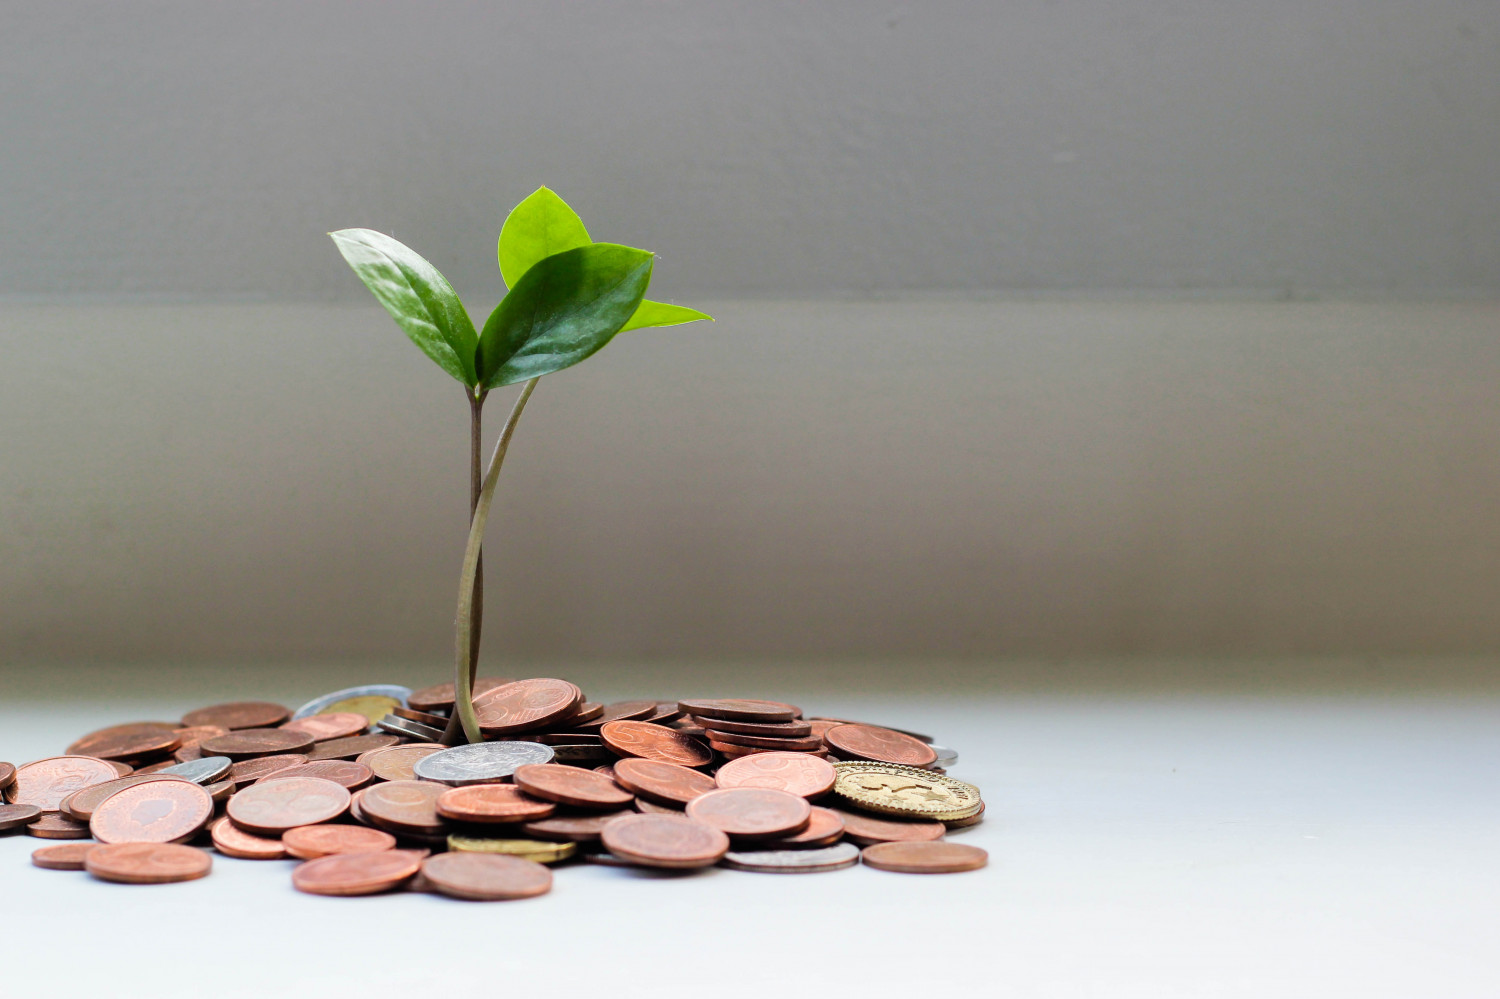 Image of a plant growing out of a stack of coins